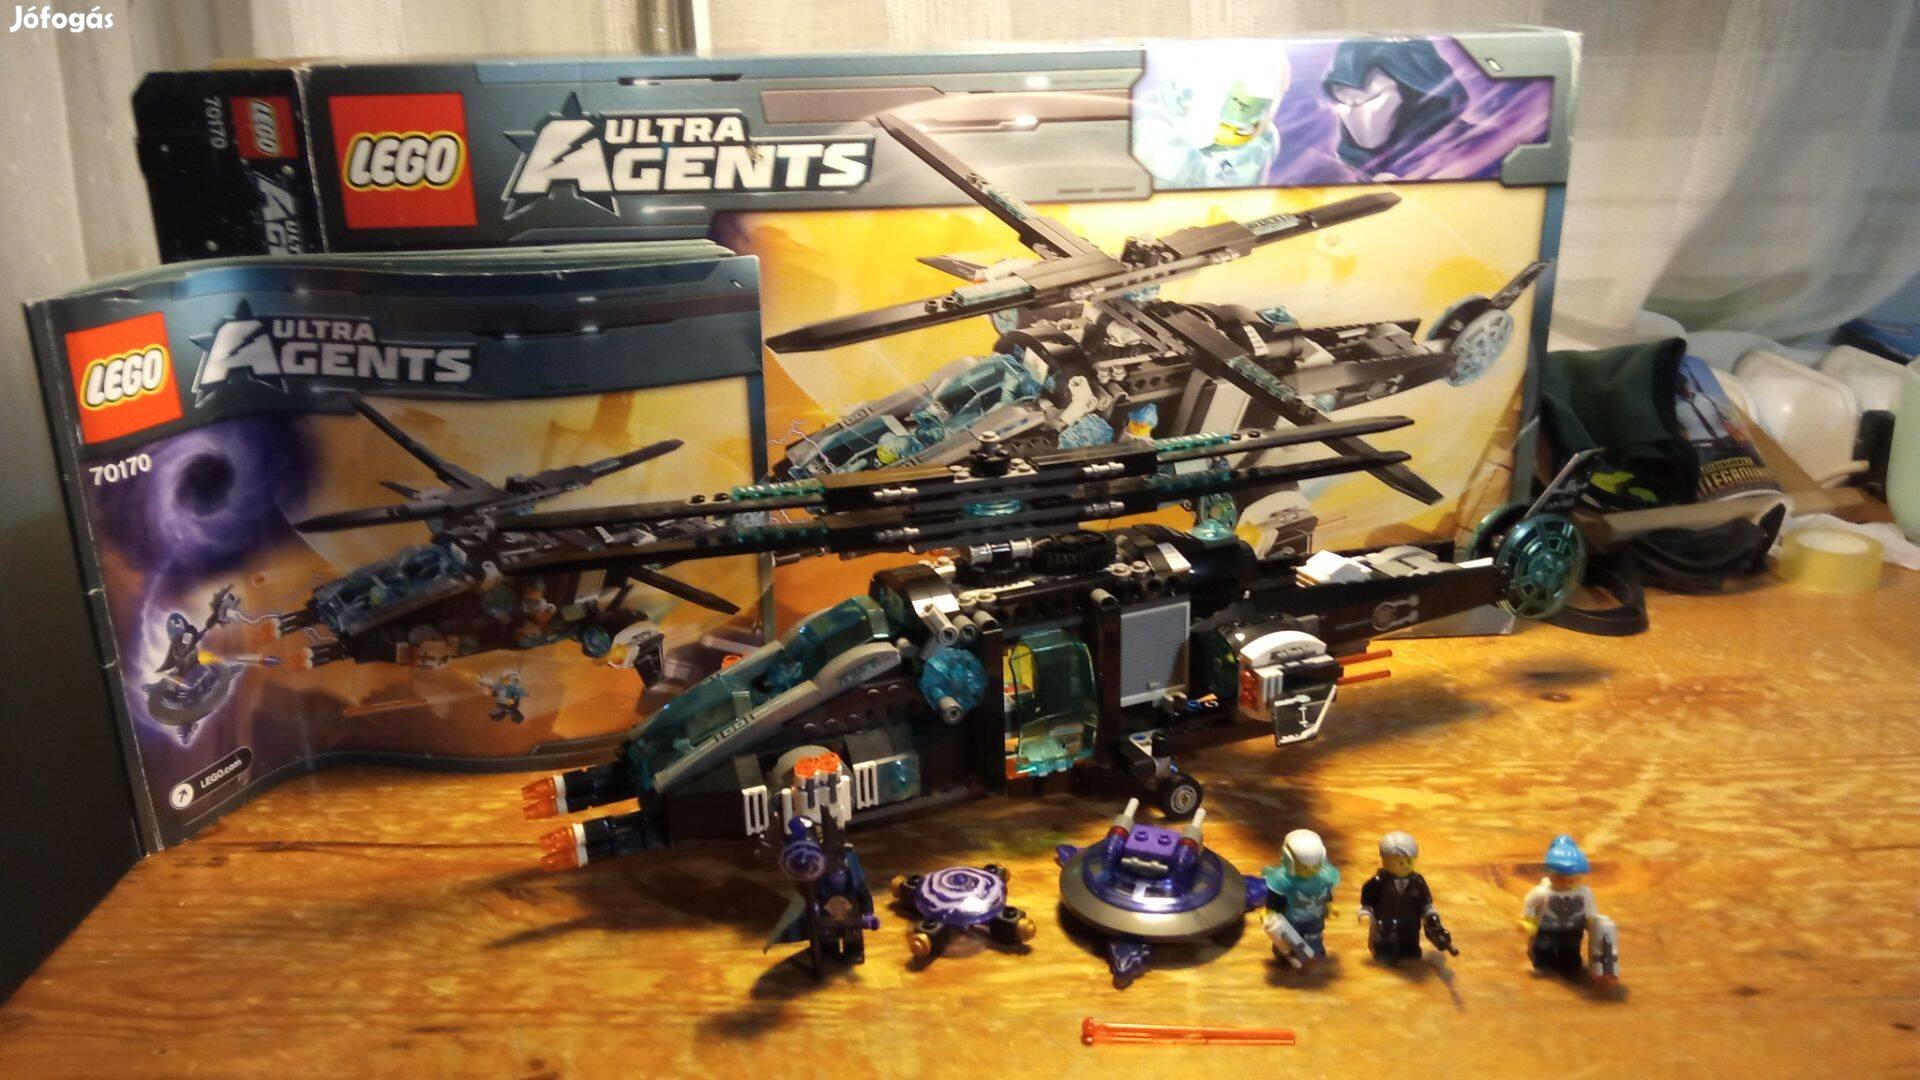 Lego Ultra Agents 70170 Ultracopter VS. Antimatter helikopter